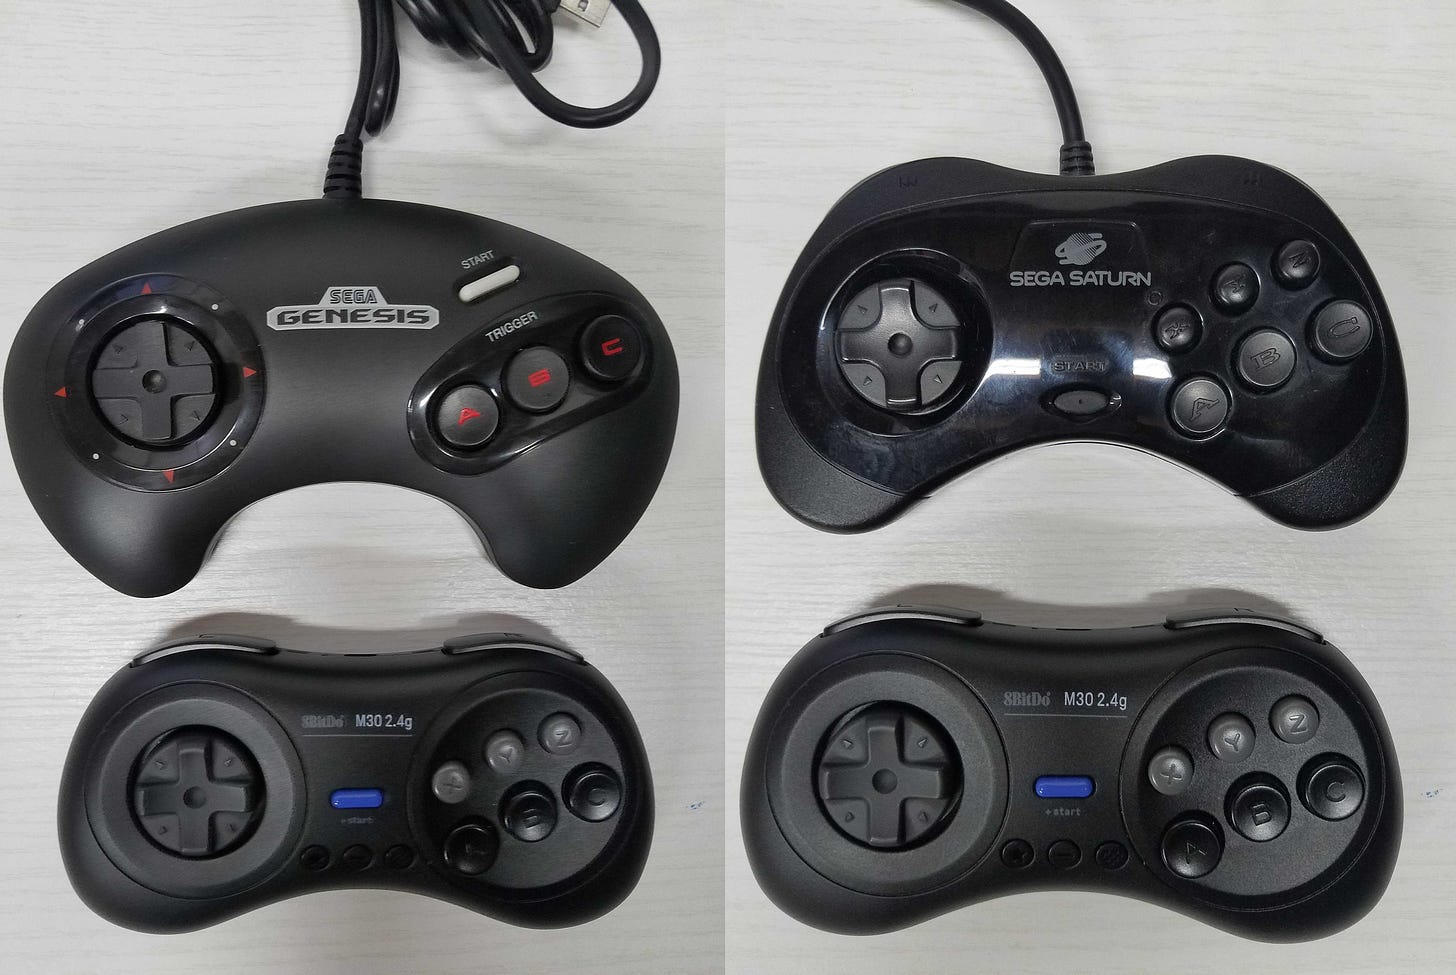 Comparison shots of the original Genesis controller with the 8BitDo 6-button replica, and the Saturn controller and the same replica.